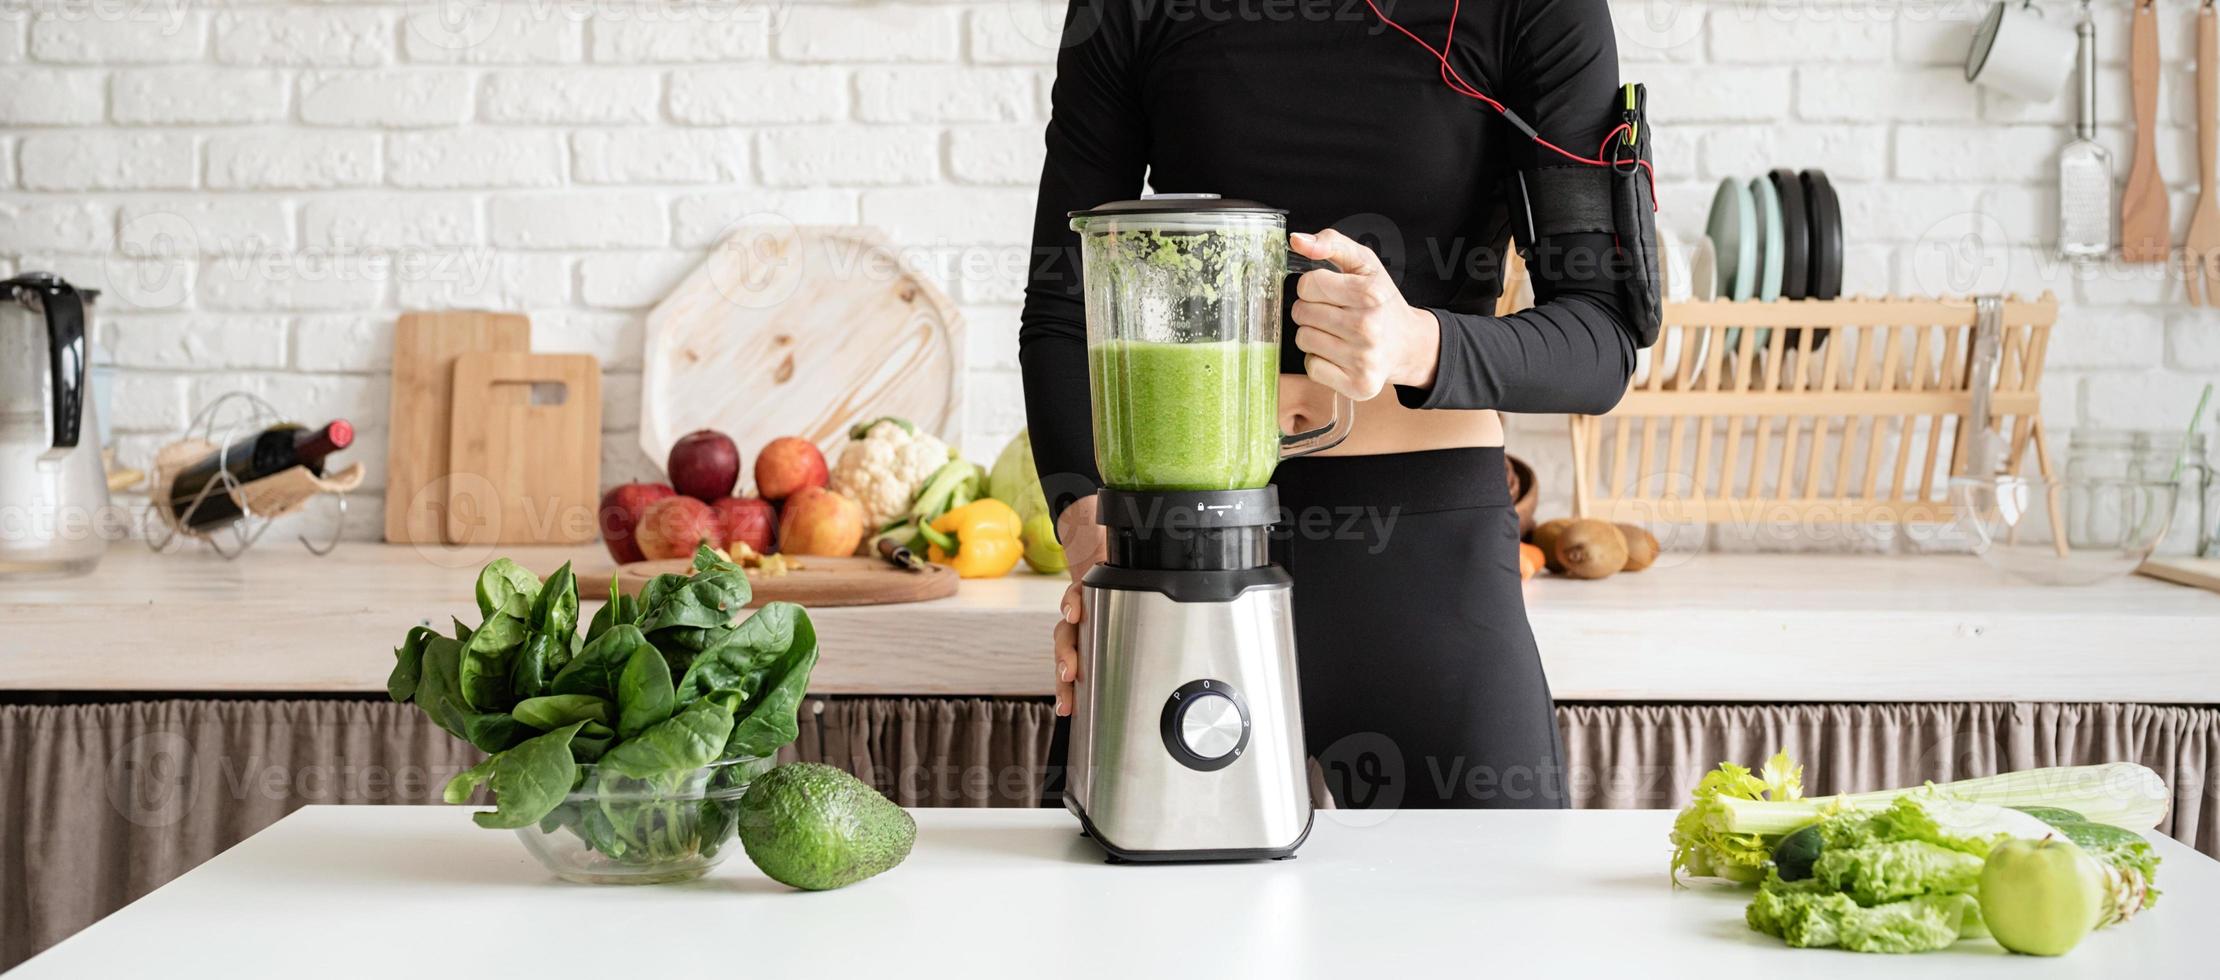 Young blond smiling woman making green smoothie at home kitchen photo